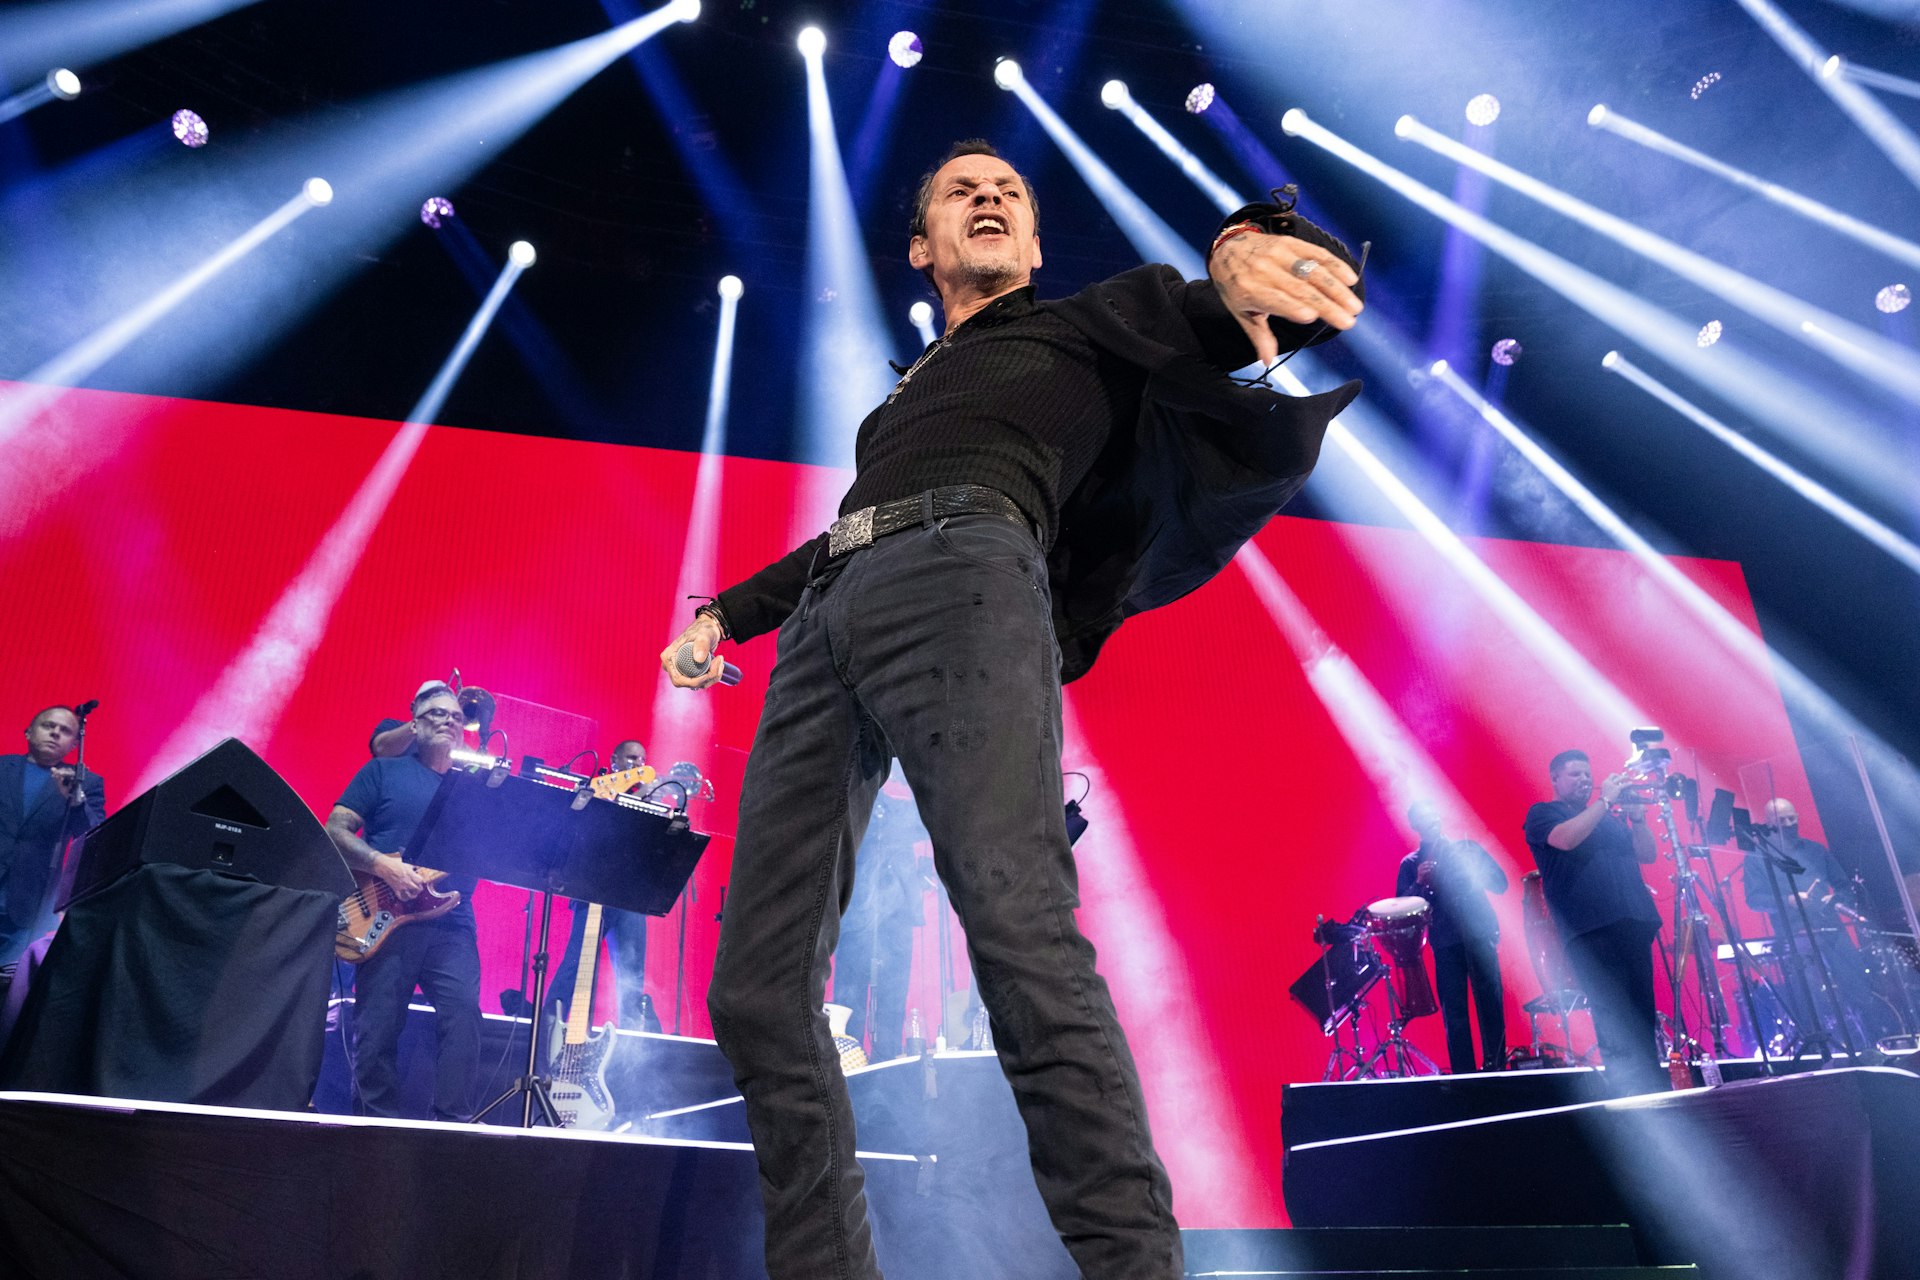 Singer Marc Anthony performs onstage during the VIVIENDO Tour, Inglewood, California, USA